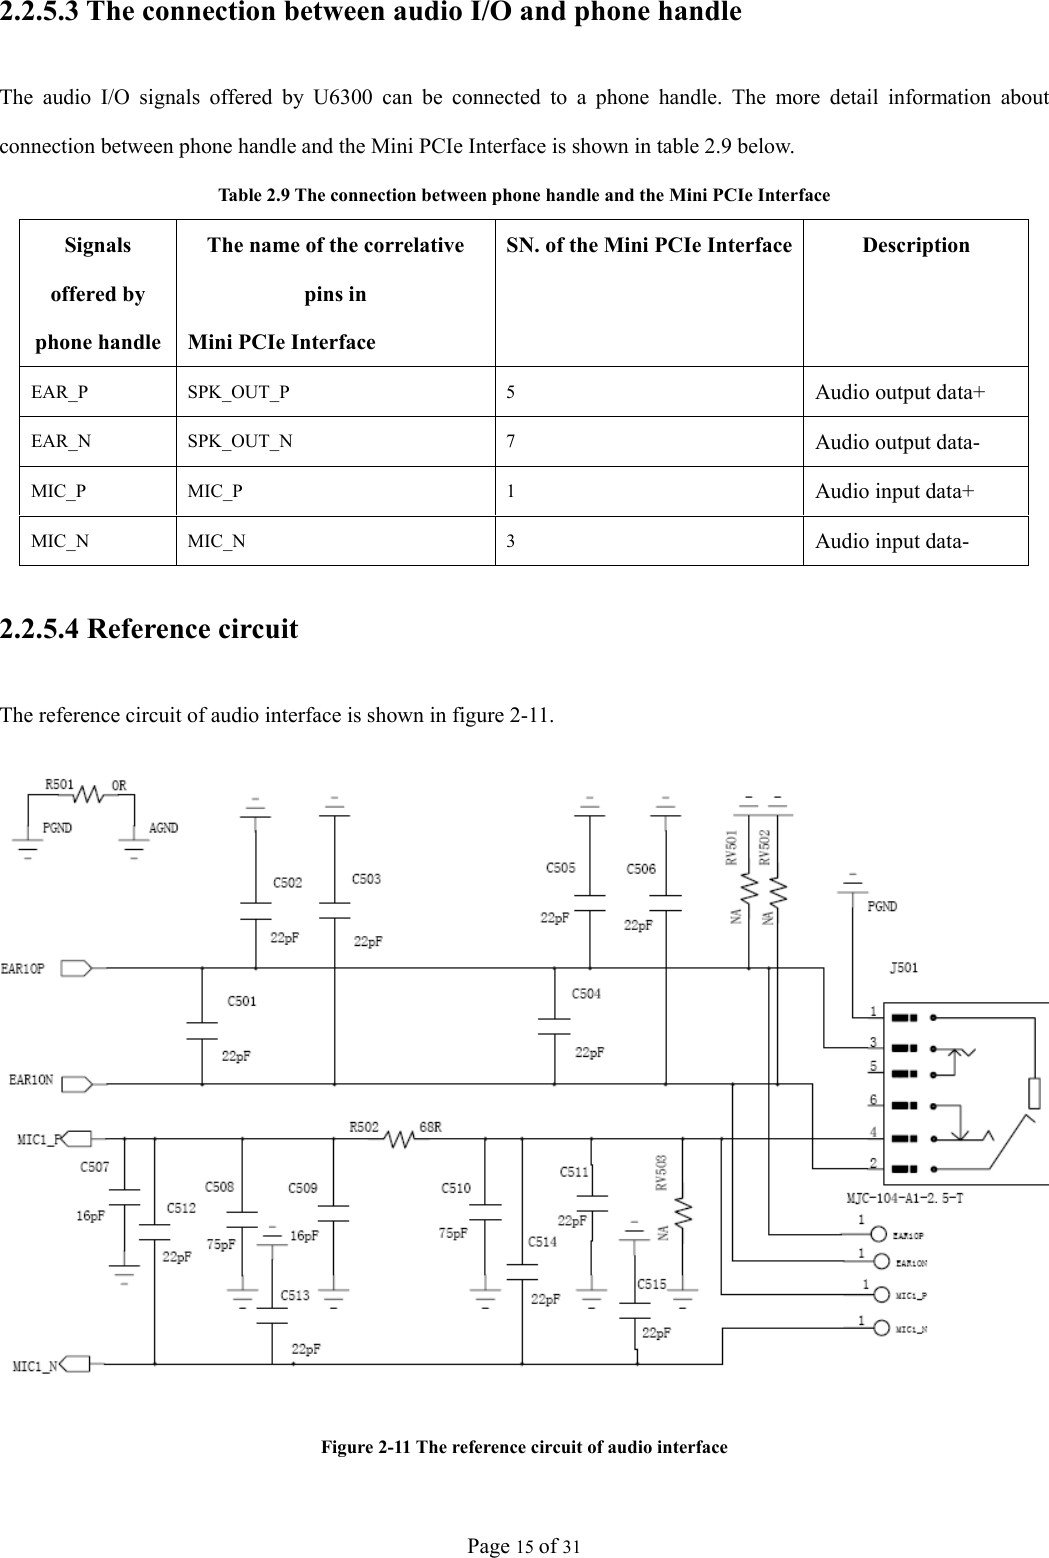 Page 15 of 31 2.2.5.3 The connection between audio I/O and phone handle The audio I/O signals offered by U6300 can be connected to a phone handle. The more detail information about connection between phone handle and the Mini PCIe Interface is shown in table 2.9 below. Table 2.9 The connection between phone handle and the Mini PCIe Interface Signals offered by phone handle The name of the correlative pins in   Mini PCIe Interface SN. of the Mini PCIe Interface  Description EAR_P SPK_OUT_P  5  Audio output data+ EAR_N SPK_OUT_N  7  Audio output data- MIC_P MIC_P  1  Audio input data+ MIC_N MIC_N  3  Audio input data- 2.2.5.4 Reference circuit The reference circuit of audio interface is shown in figure 2-11.  Figure 2-11 The reference circuit of audio interface 